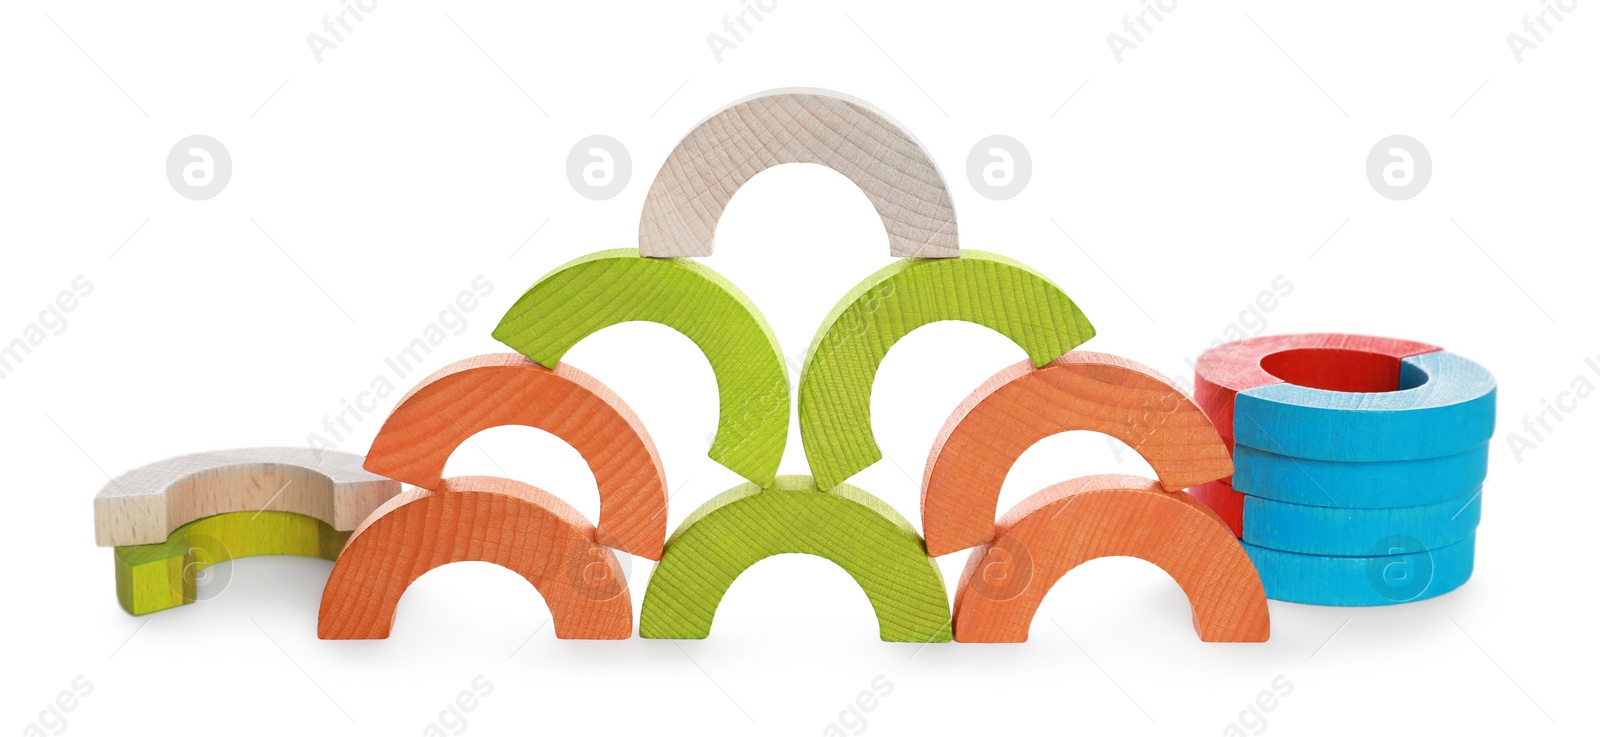 Photo of Colorful wooden pieces of play set isolated on white. Educational toy for motor skills development